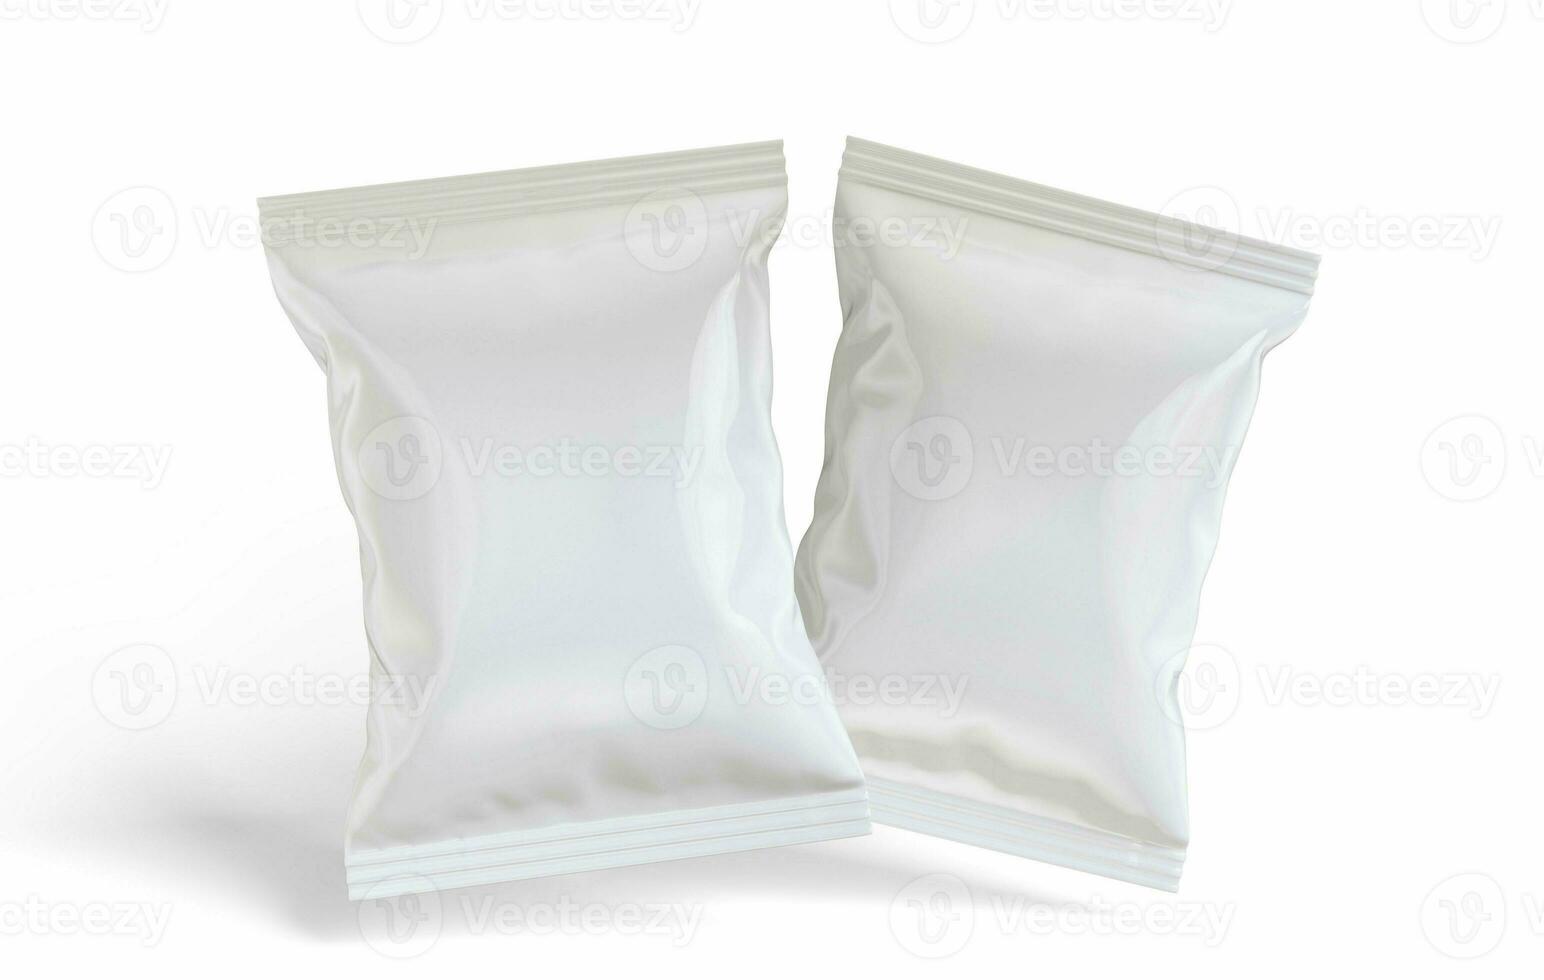 Potato chips packaging white color and rendered with 3D software photo